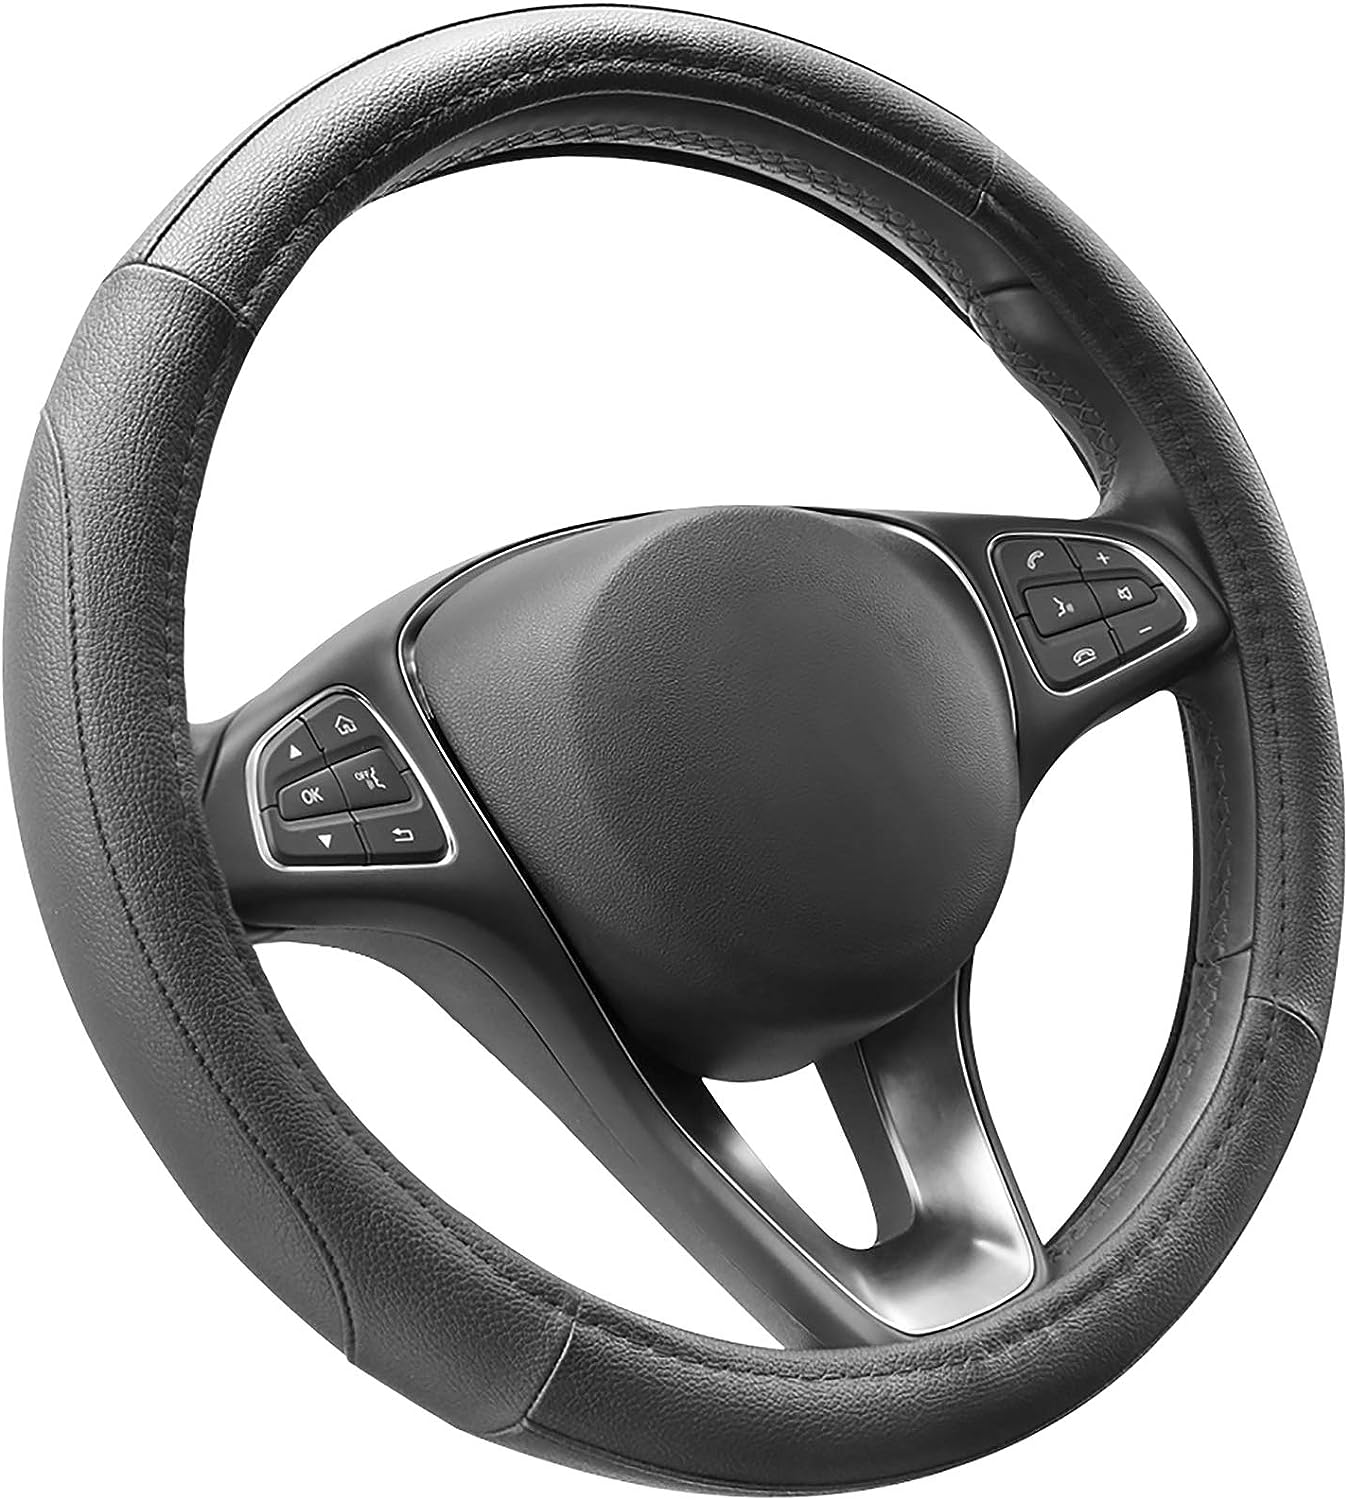 COFIT Microfiber Leather Steering Wheel Cover Universal Size M Outer Diameter 37-38cm Black